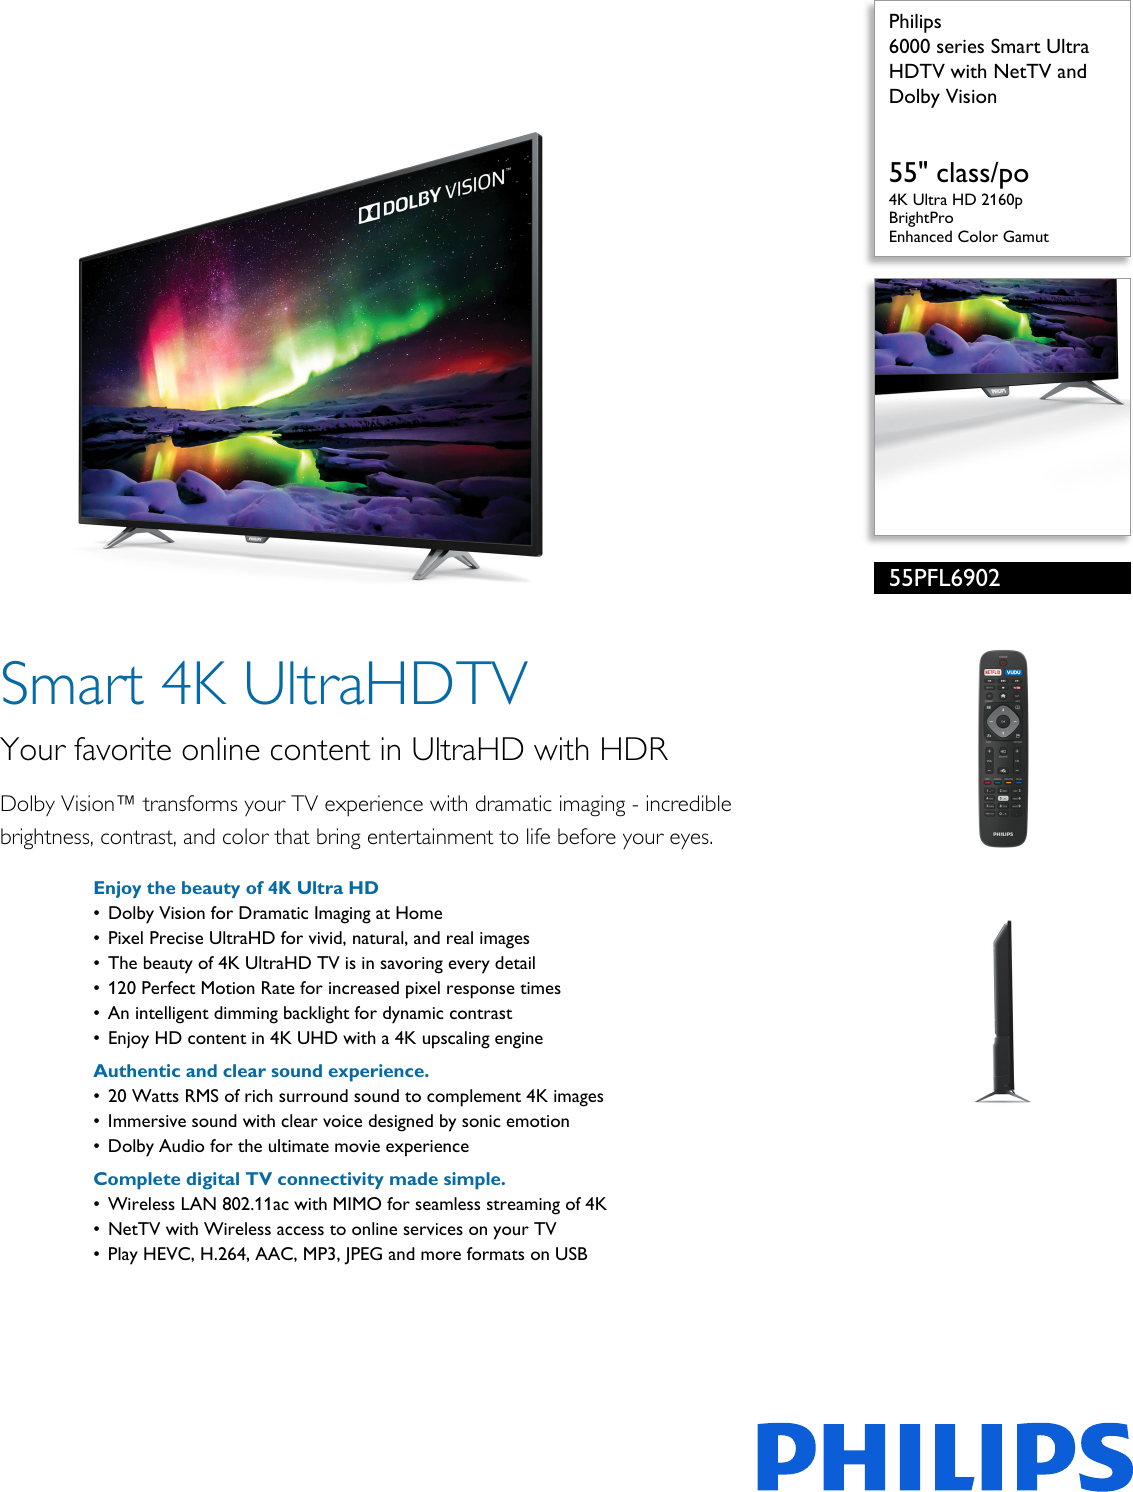 Page 1 of 3 - Philips 55PFL6902/F7 6000 Series Smart Ultra HDTV With NetTV And Dolby Vision User Manual Leaflet 55pfl6902 F7 Pss Aenus